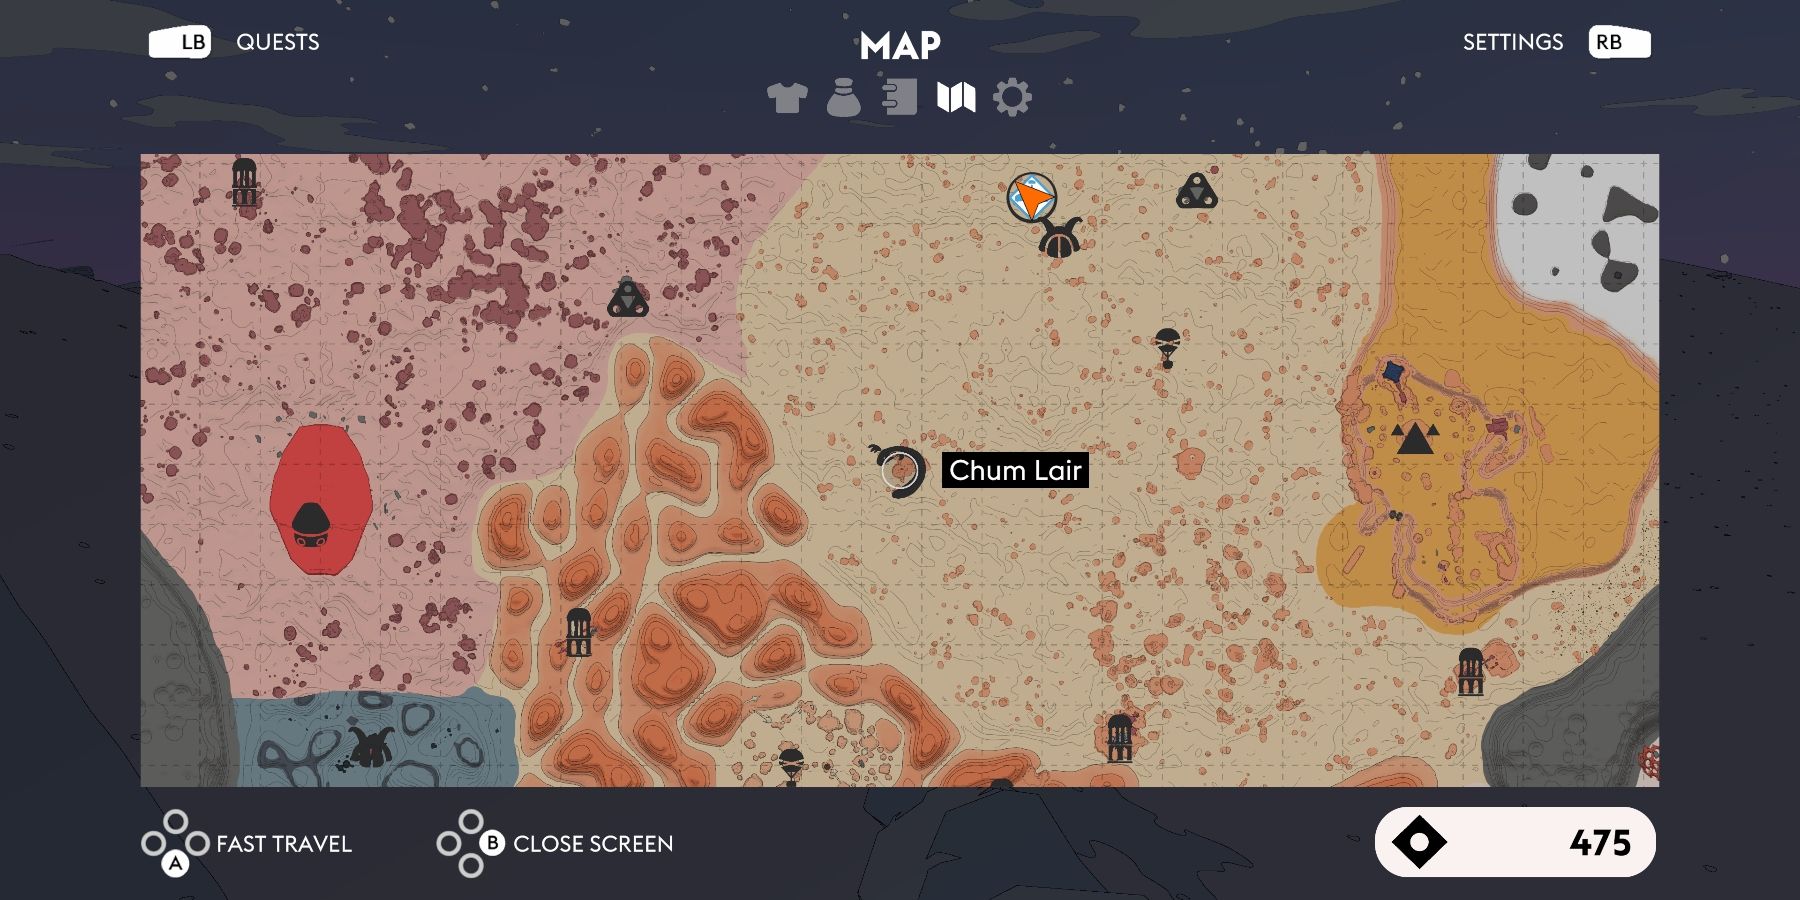 A map with different colors of sand denoting different regions; the cursor is centered on a location called Chum Lair